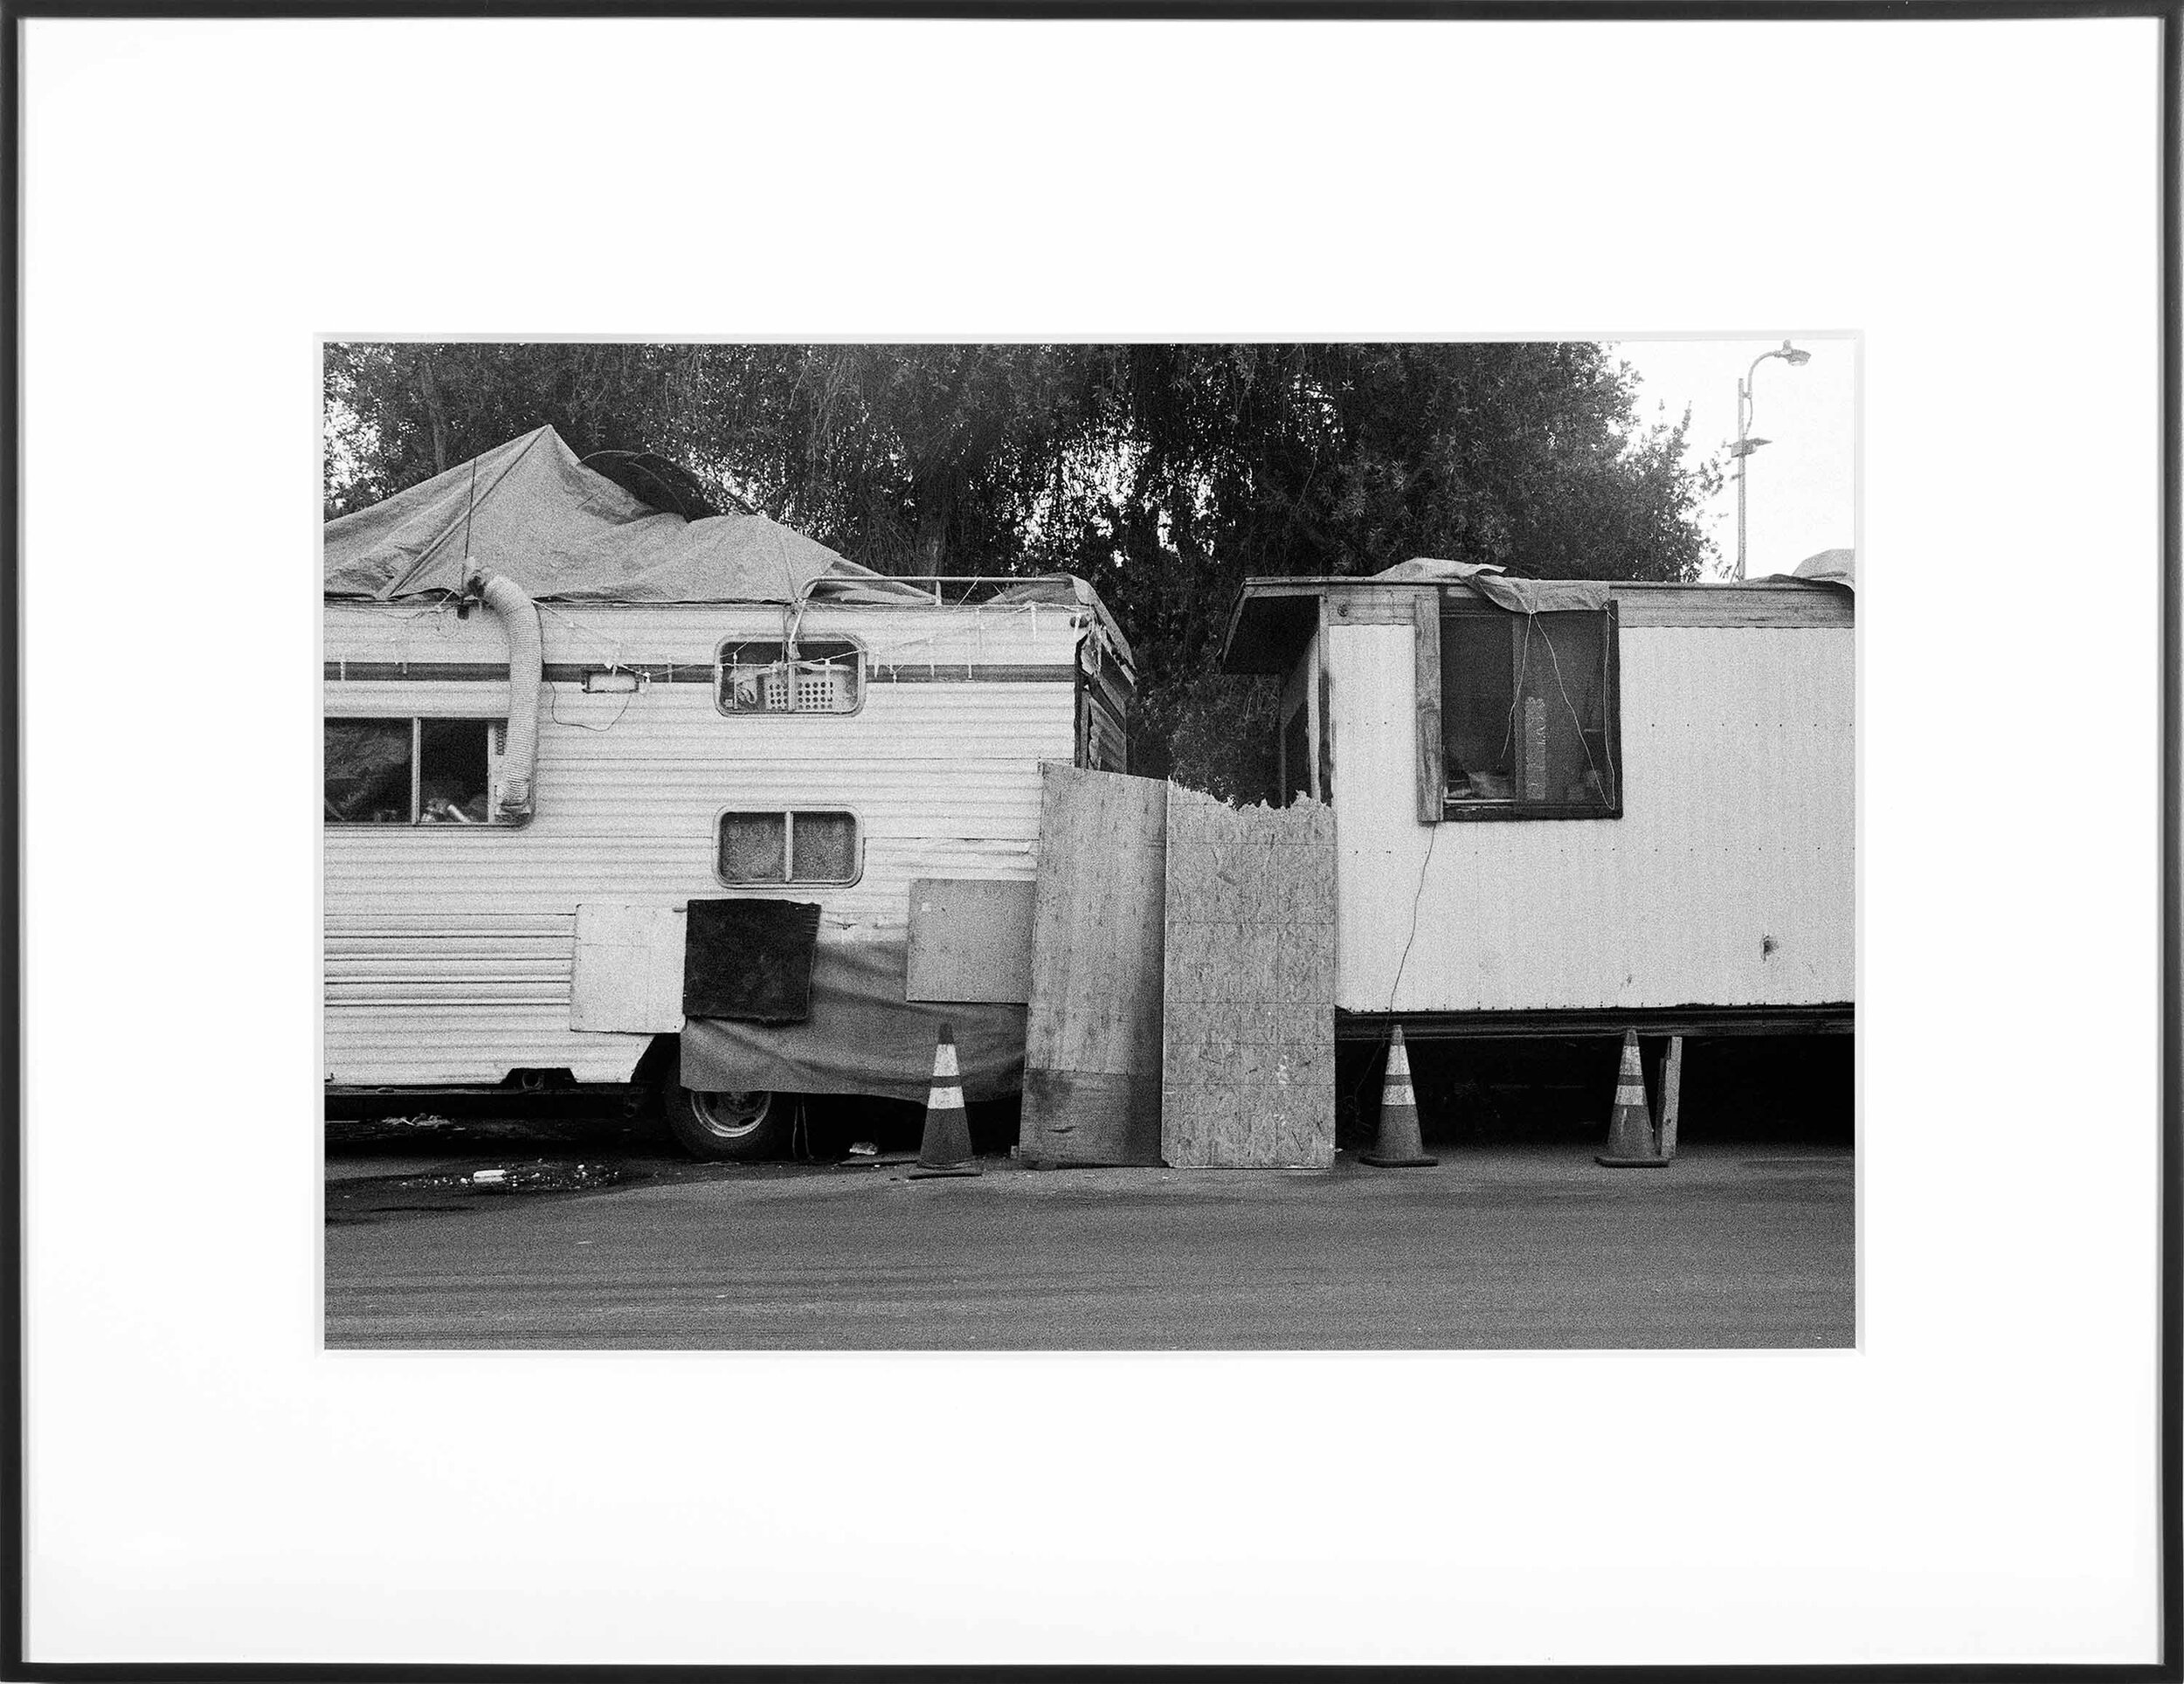   (Temporary) Homes for America: 3300 block to 4400 block, Union Pacific Avenue, between South Grande Vista Avenue and South Marianna Avenue, Los Angeles/Commerce, California, December 2020   2021  black and white fiber print 11 x 15 inches 